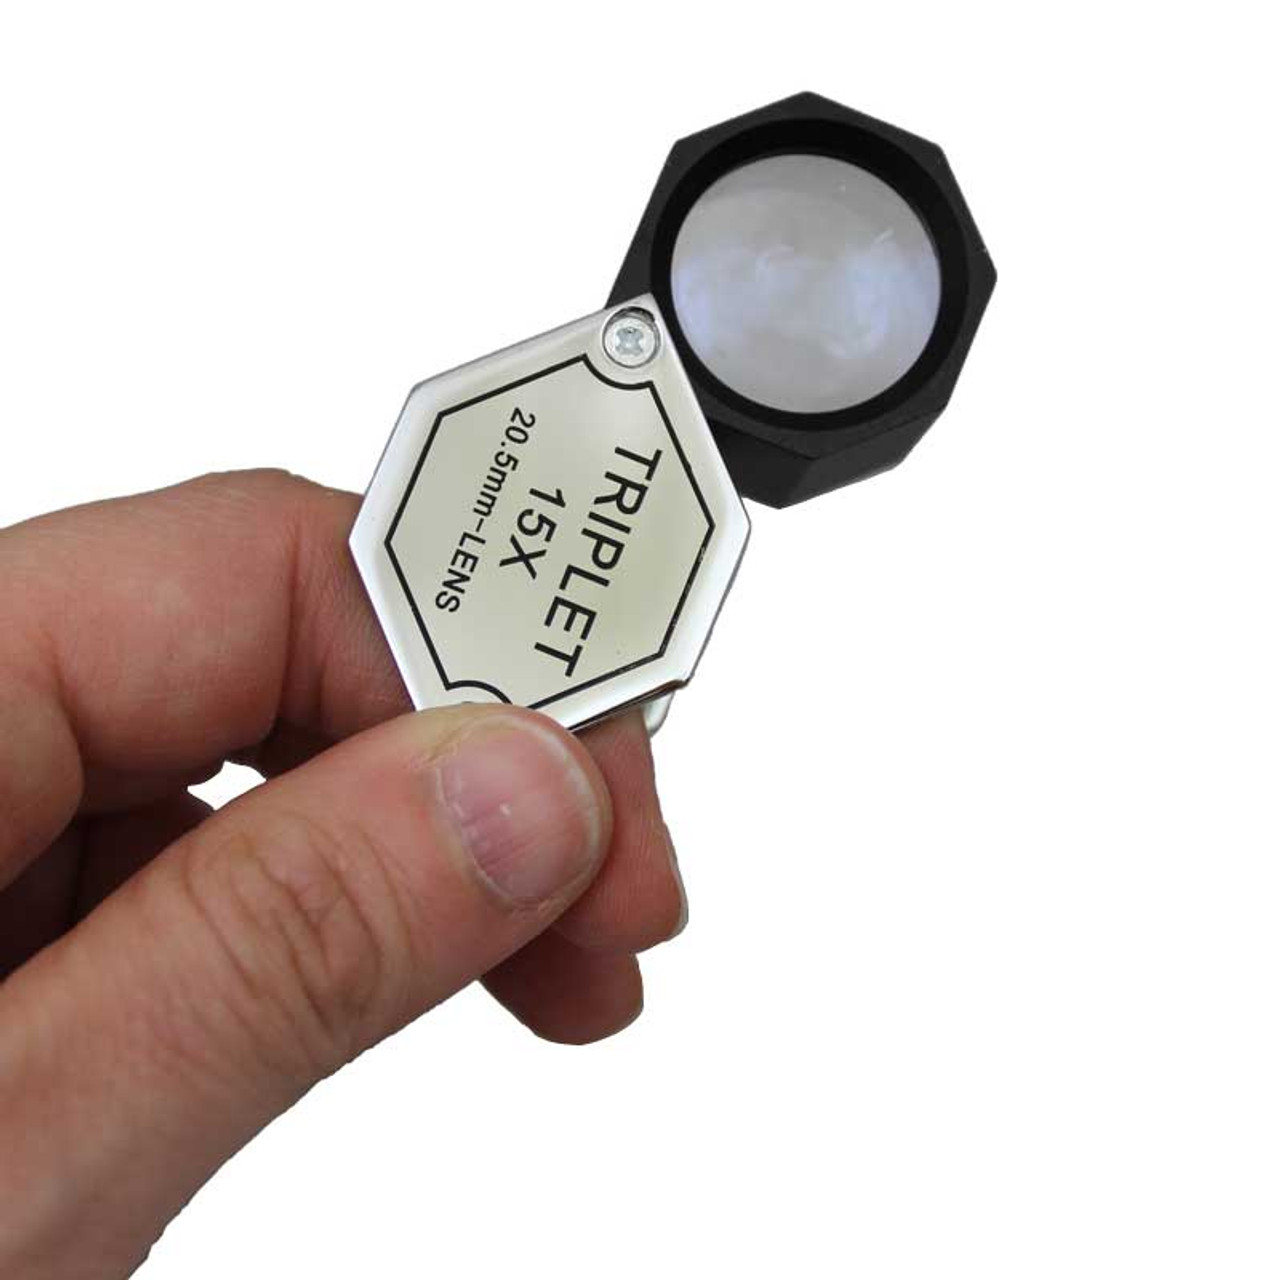 Jewelers 15x Triplet Loupe 20.5mm Lens - Hand Held Magnifier